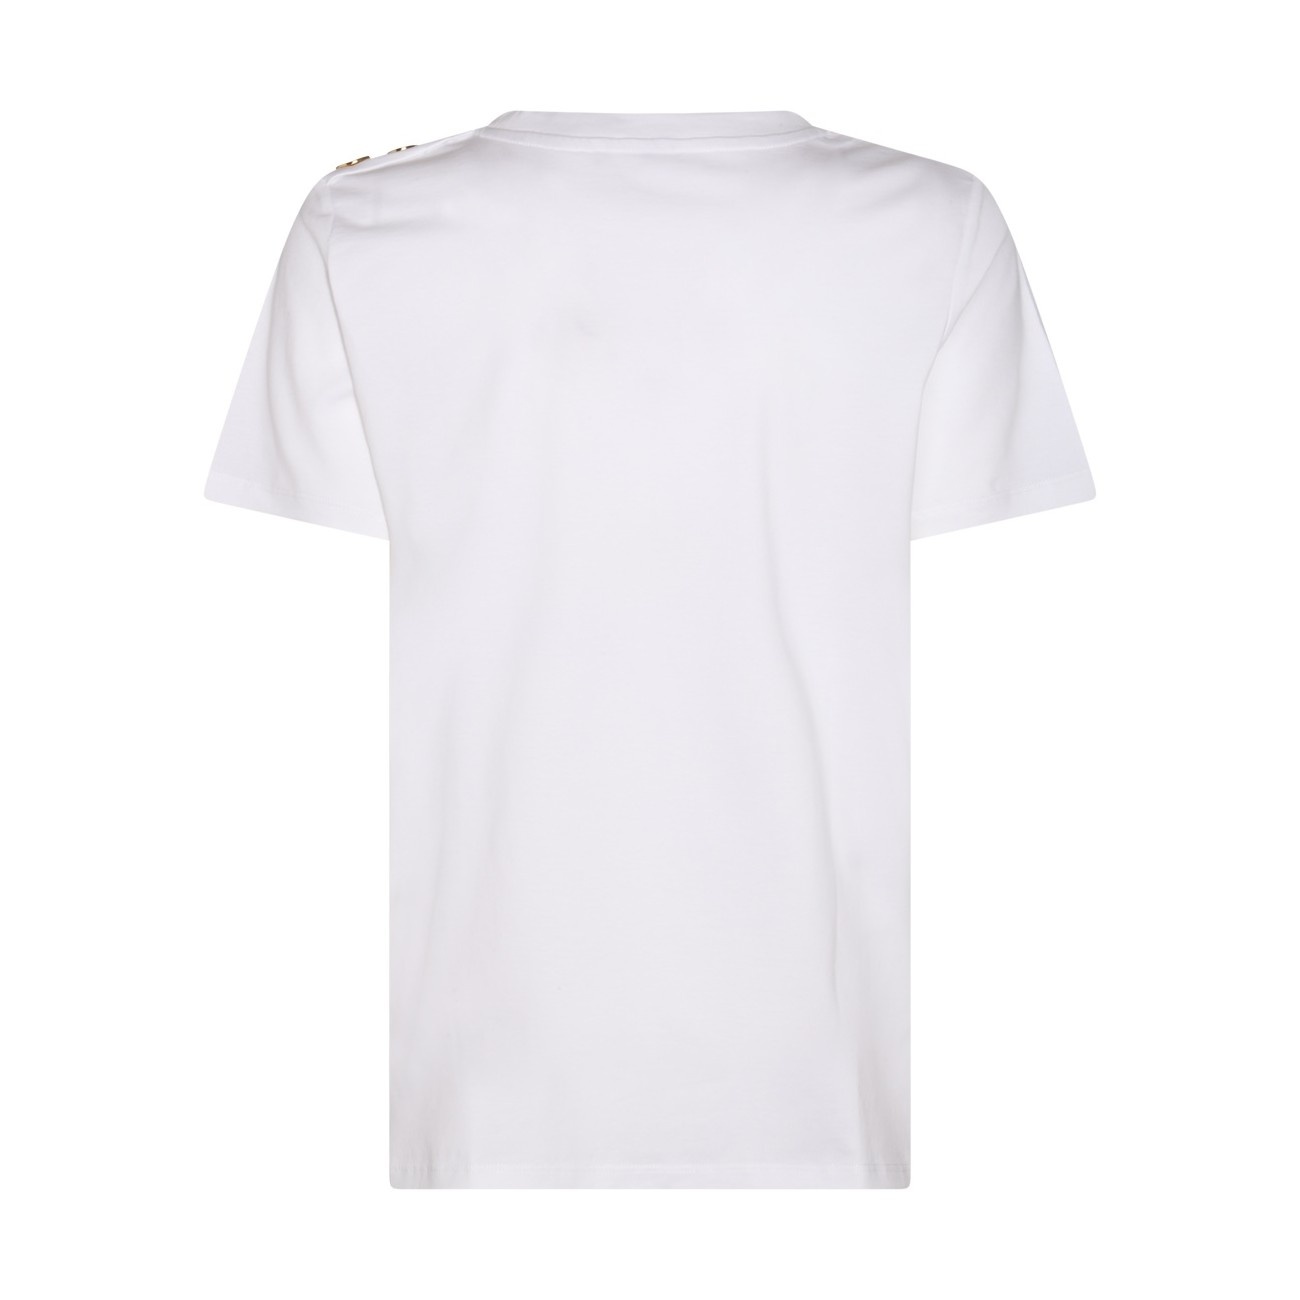 white and black cotton t-shirt - 2